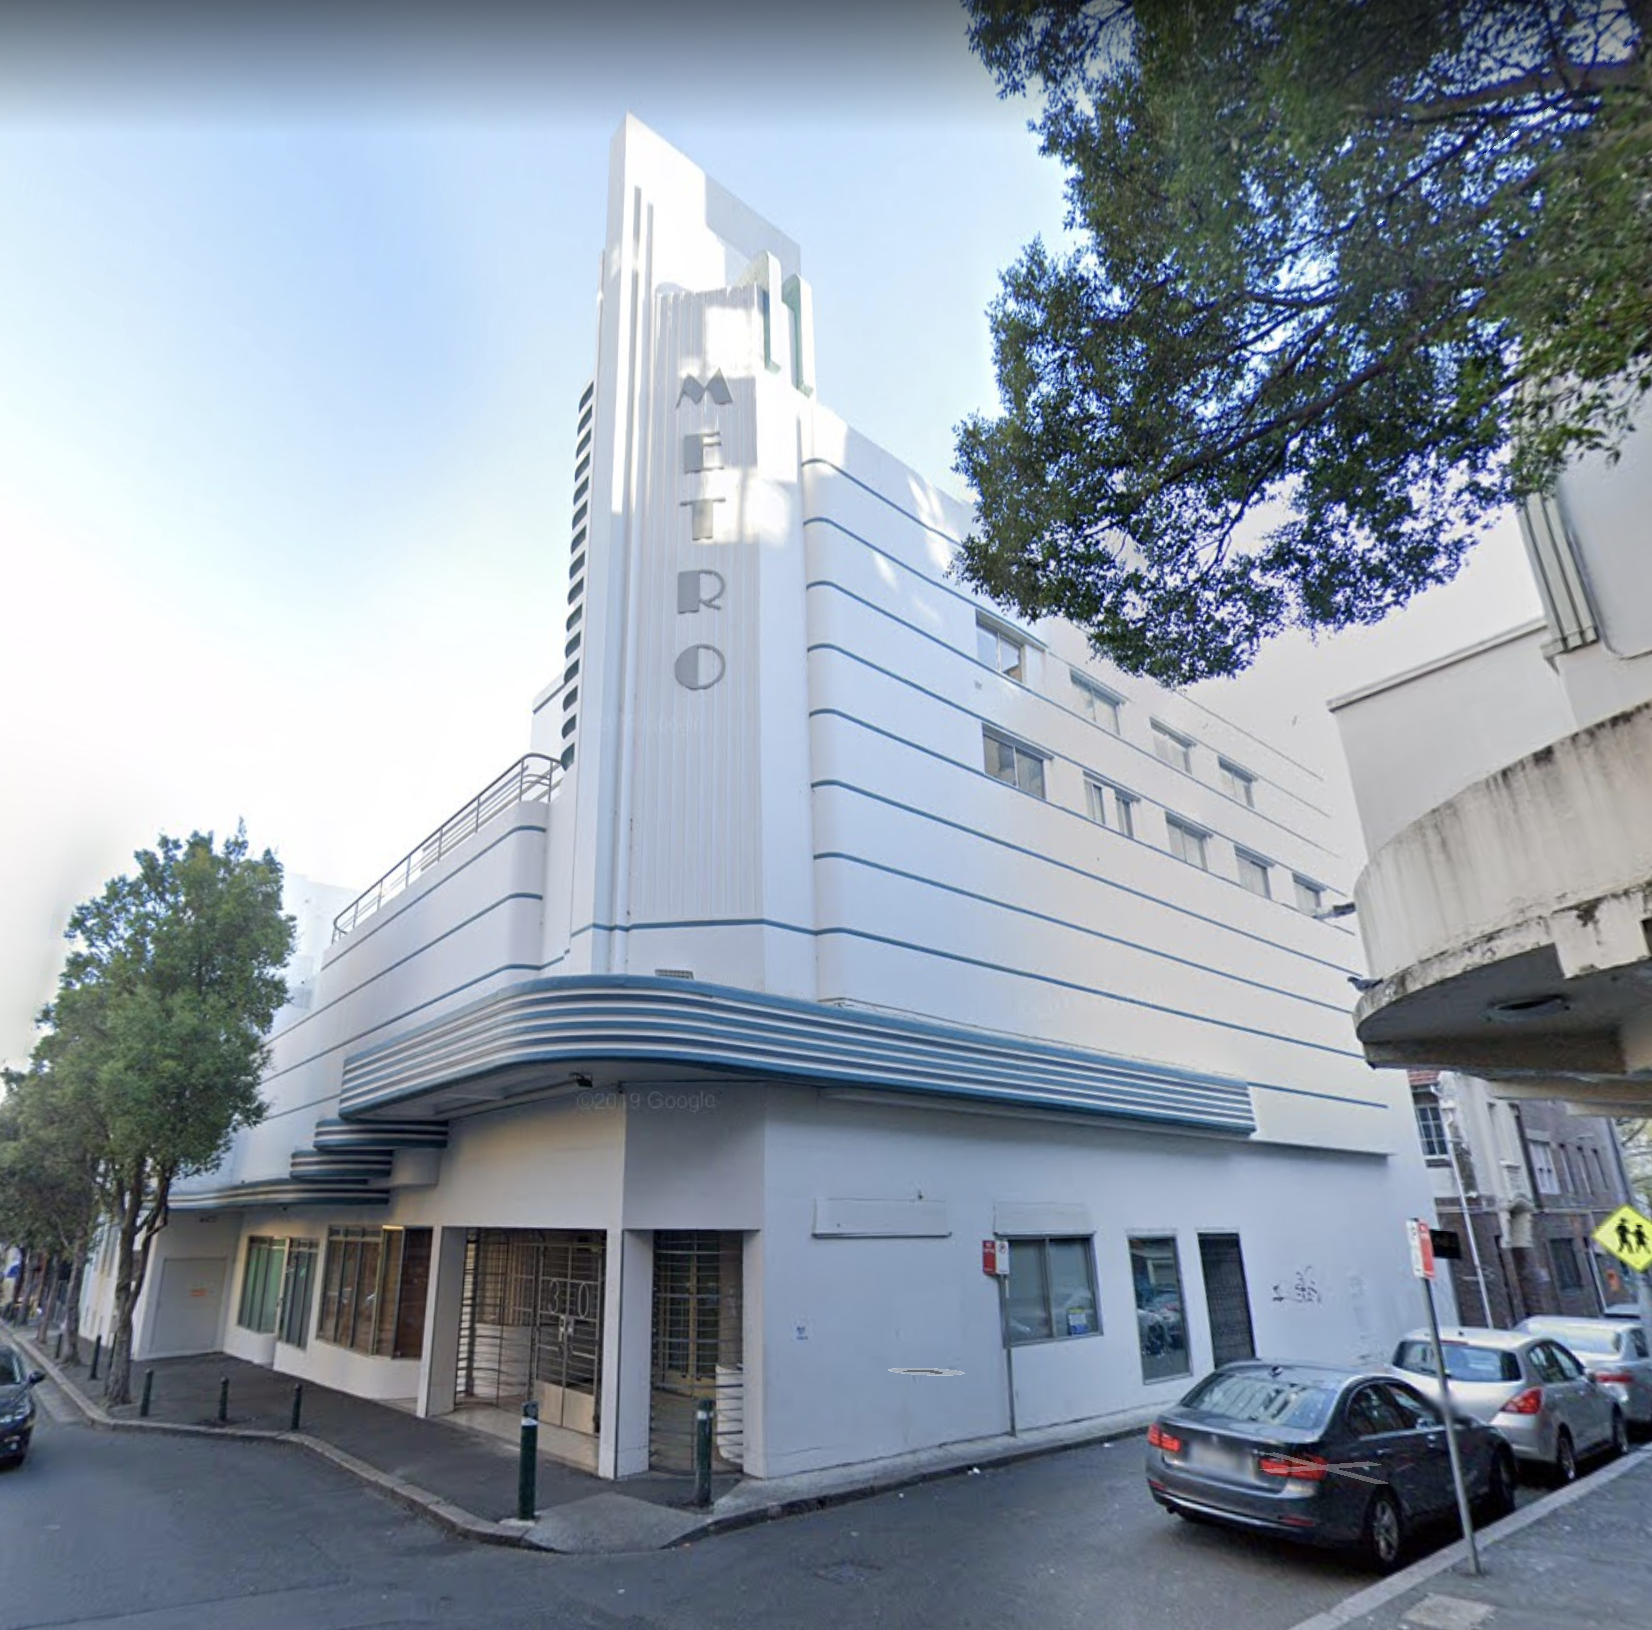 Art Deco architecture of Potts Point and Elizabeth Bay proves the potential of Kings Cross